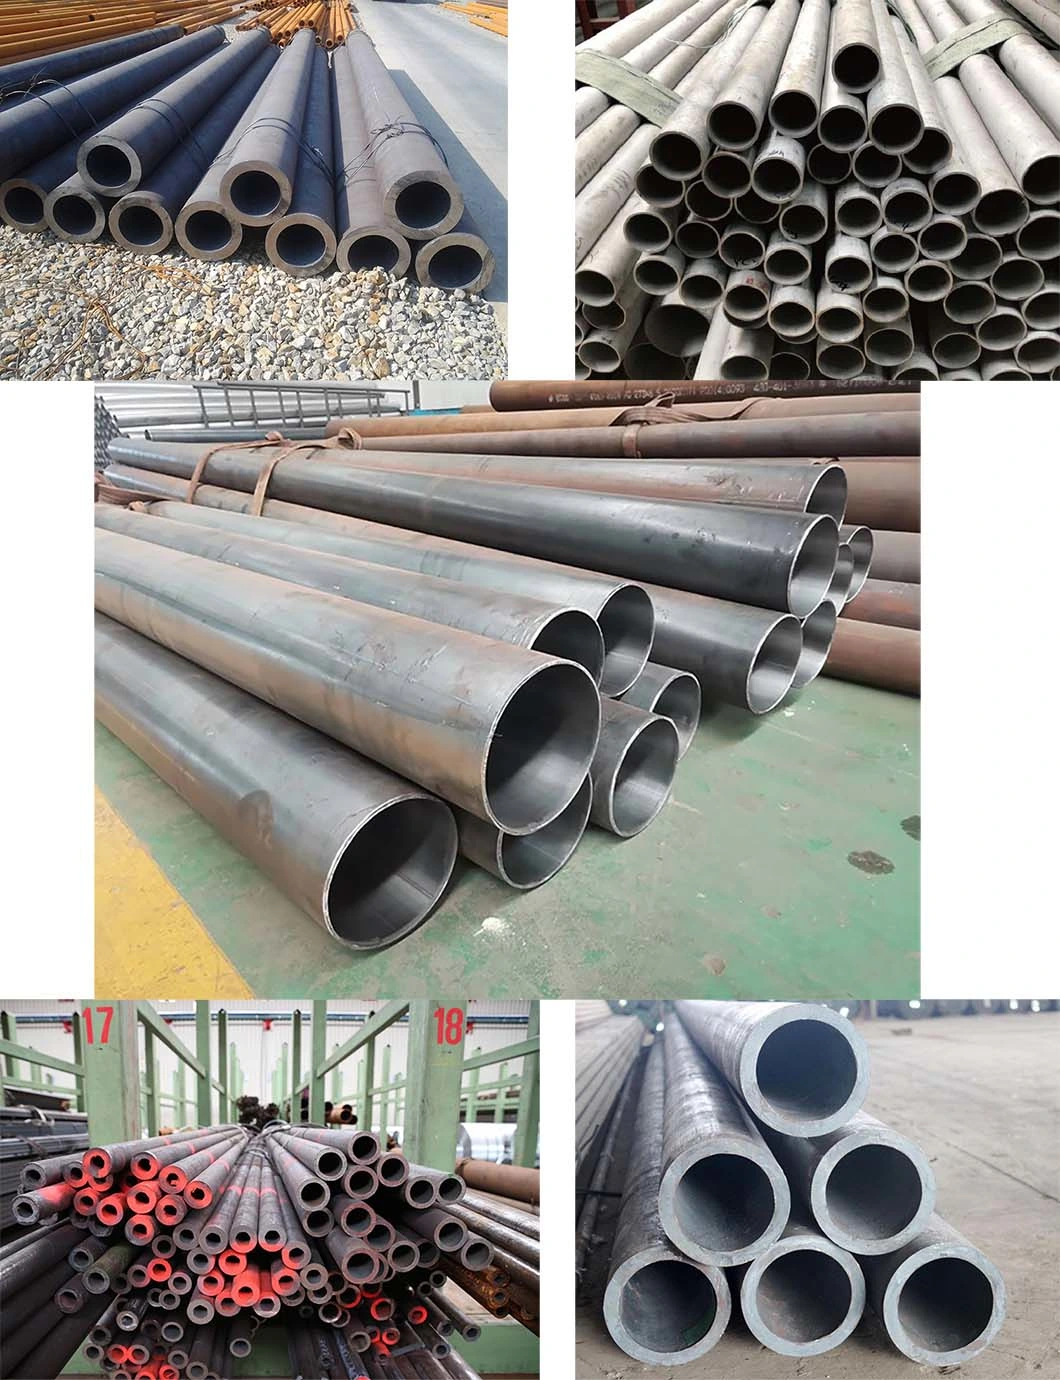 38 Inch Steel Tube Carbon Steel Pipe Seamless 1045 Seamless Carbon 1.2mm Thickness Steel Pipe